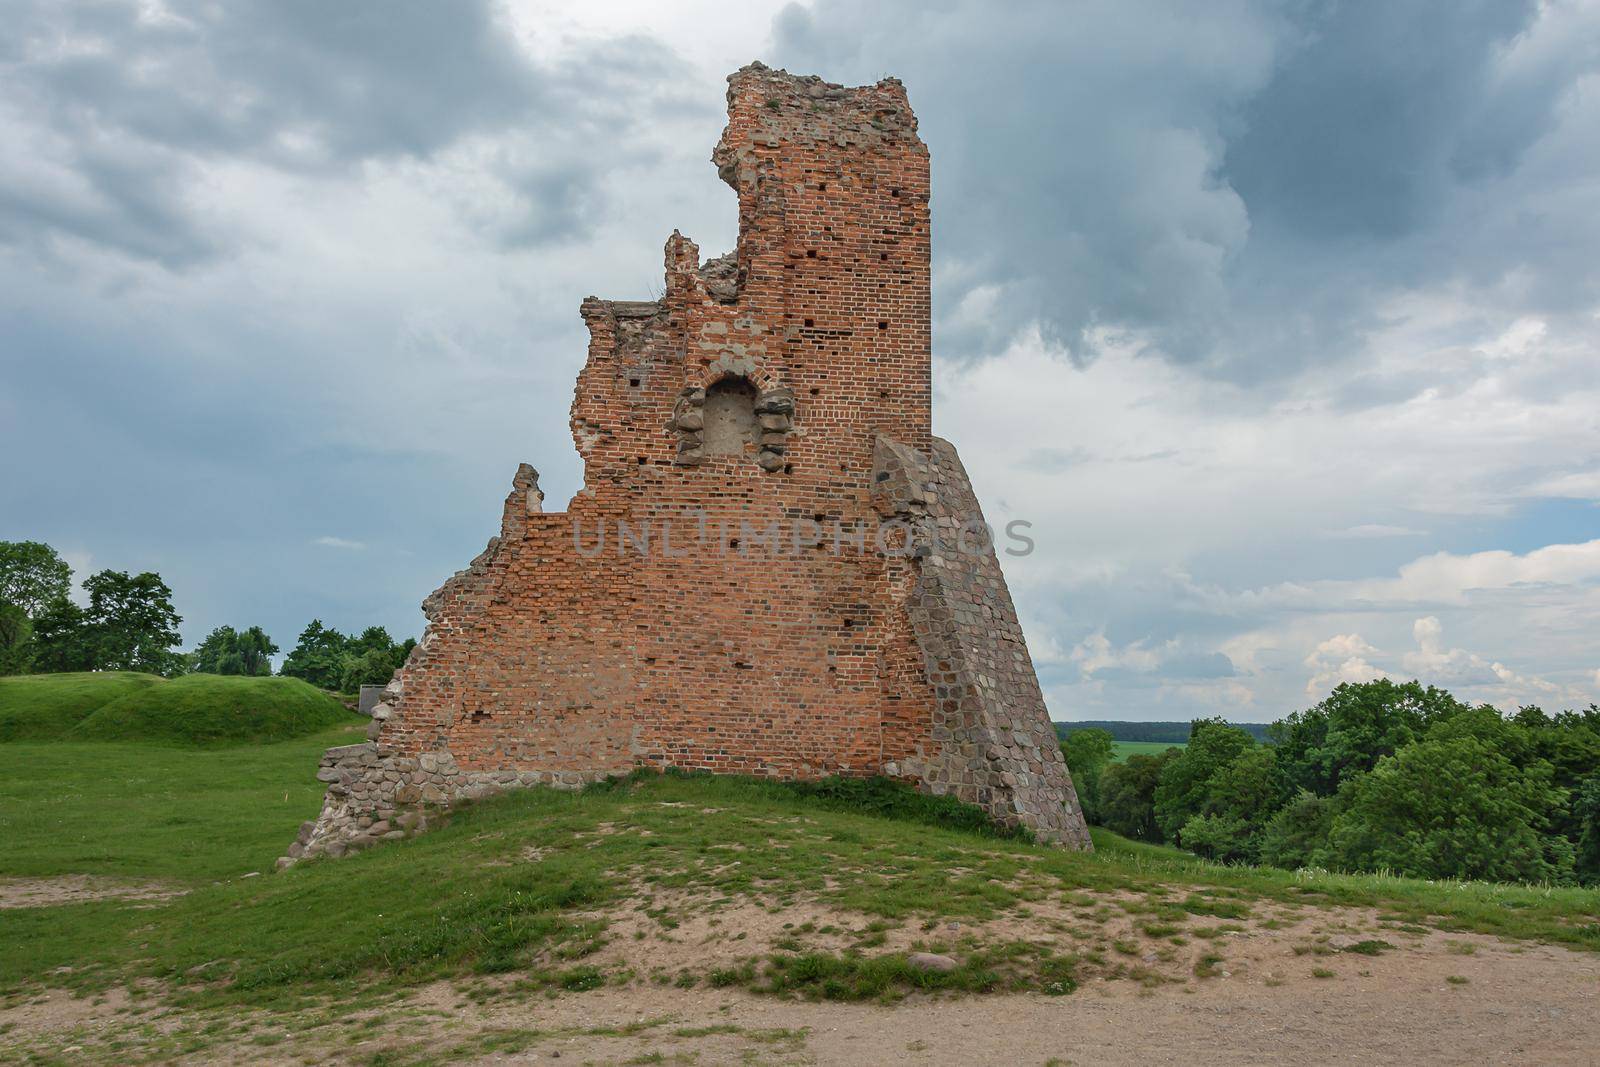 Remains of the ruins of an old fortress (Novogrudok, Belarus) by Grommik